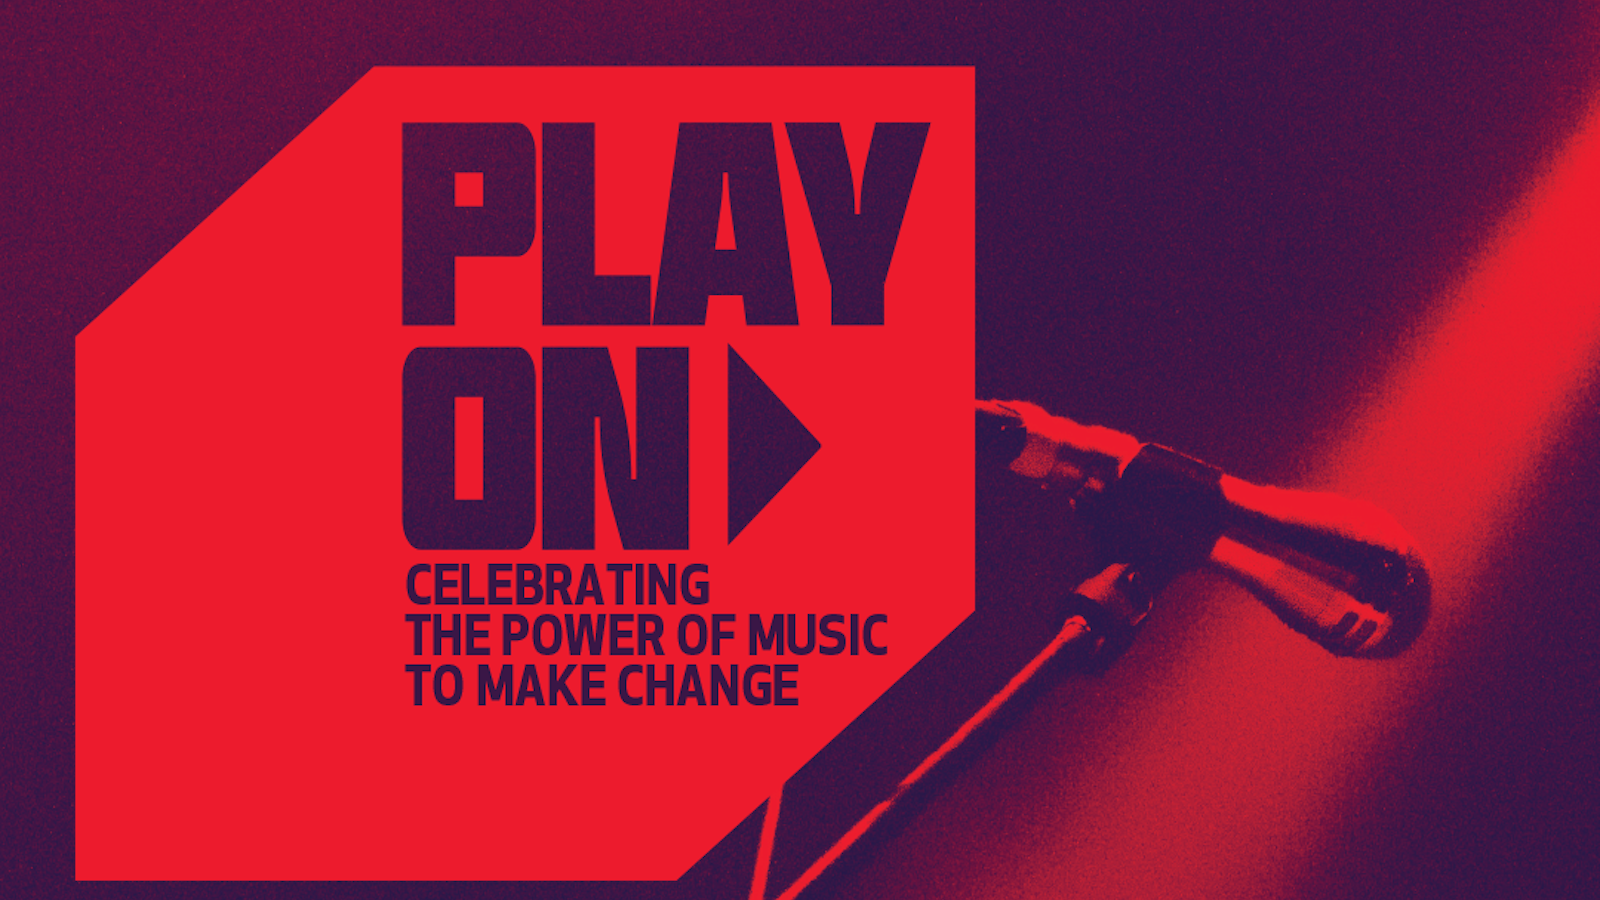 siriusxm the pulse play on celebrating the power of music to make change